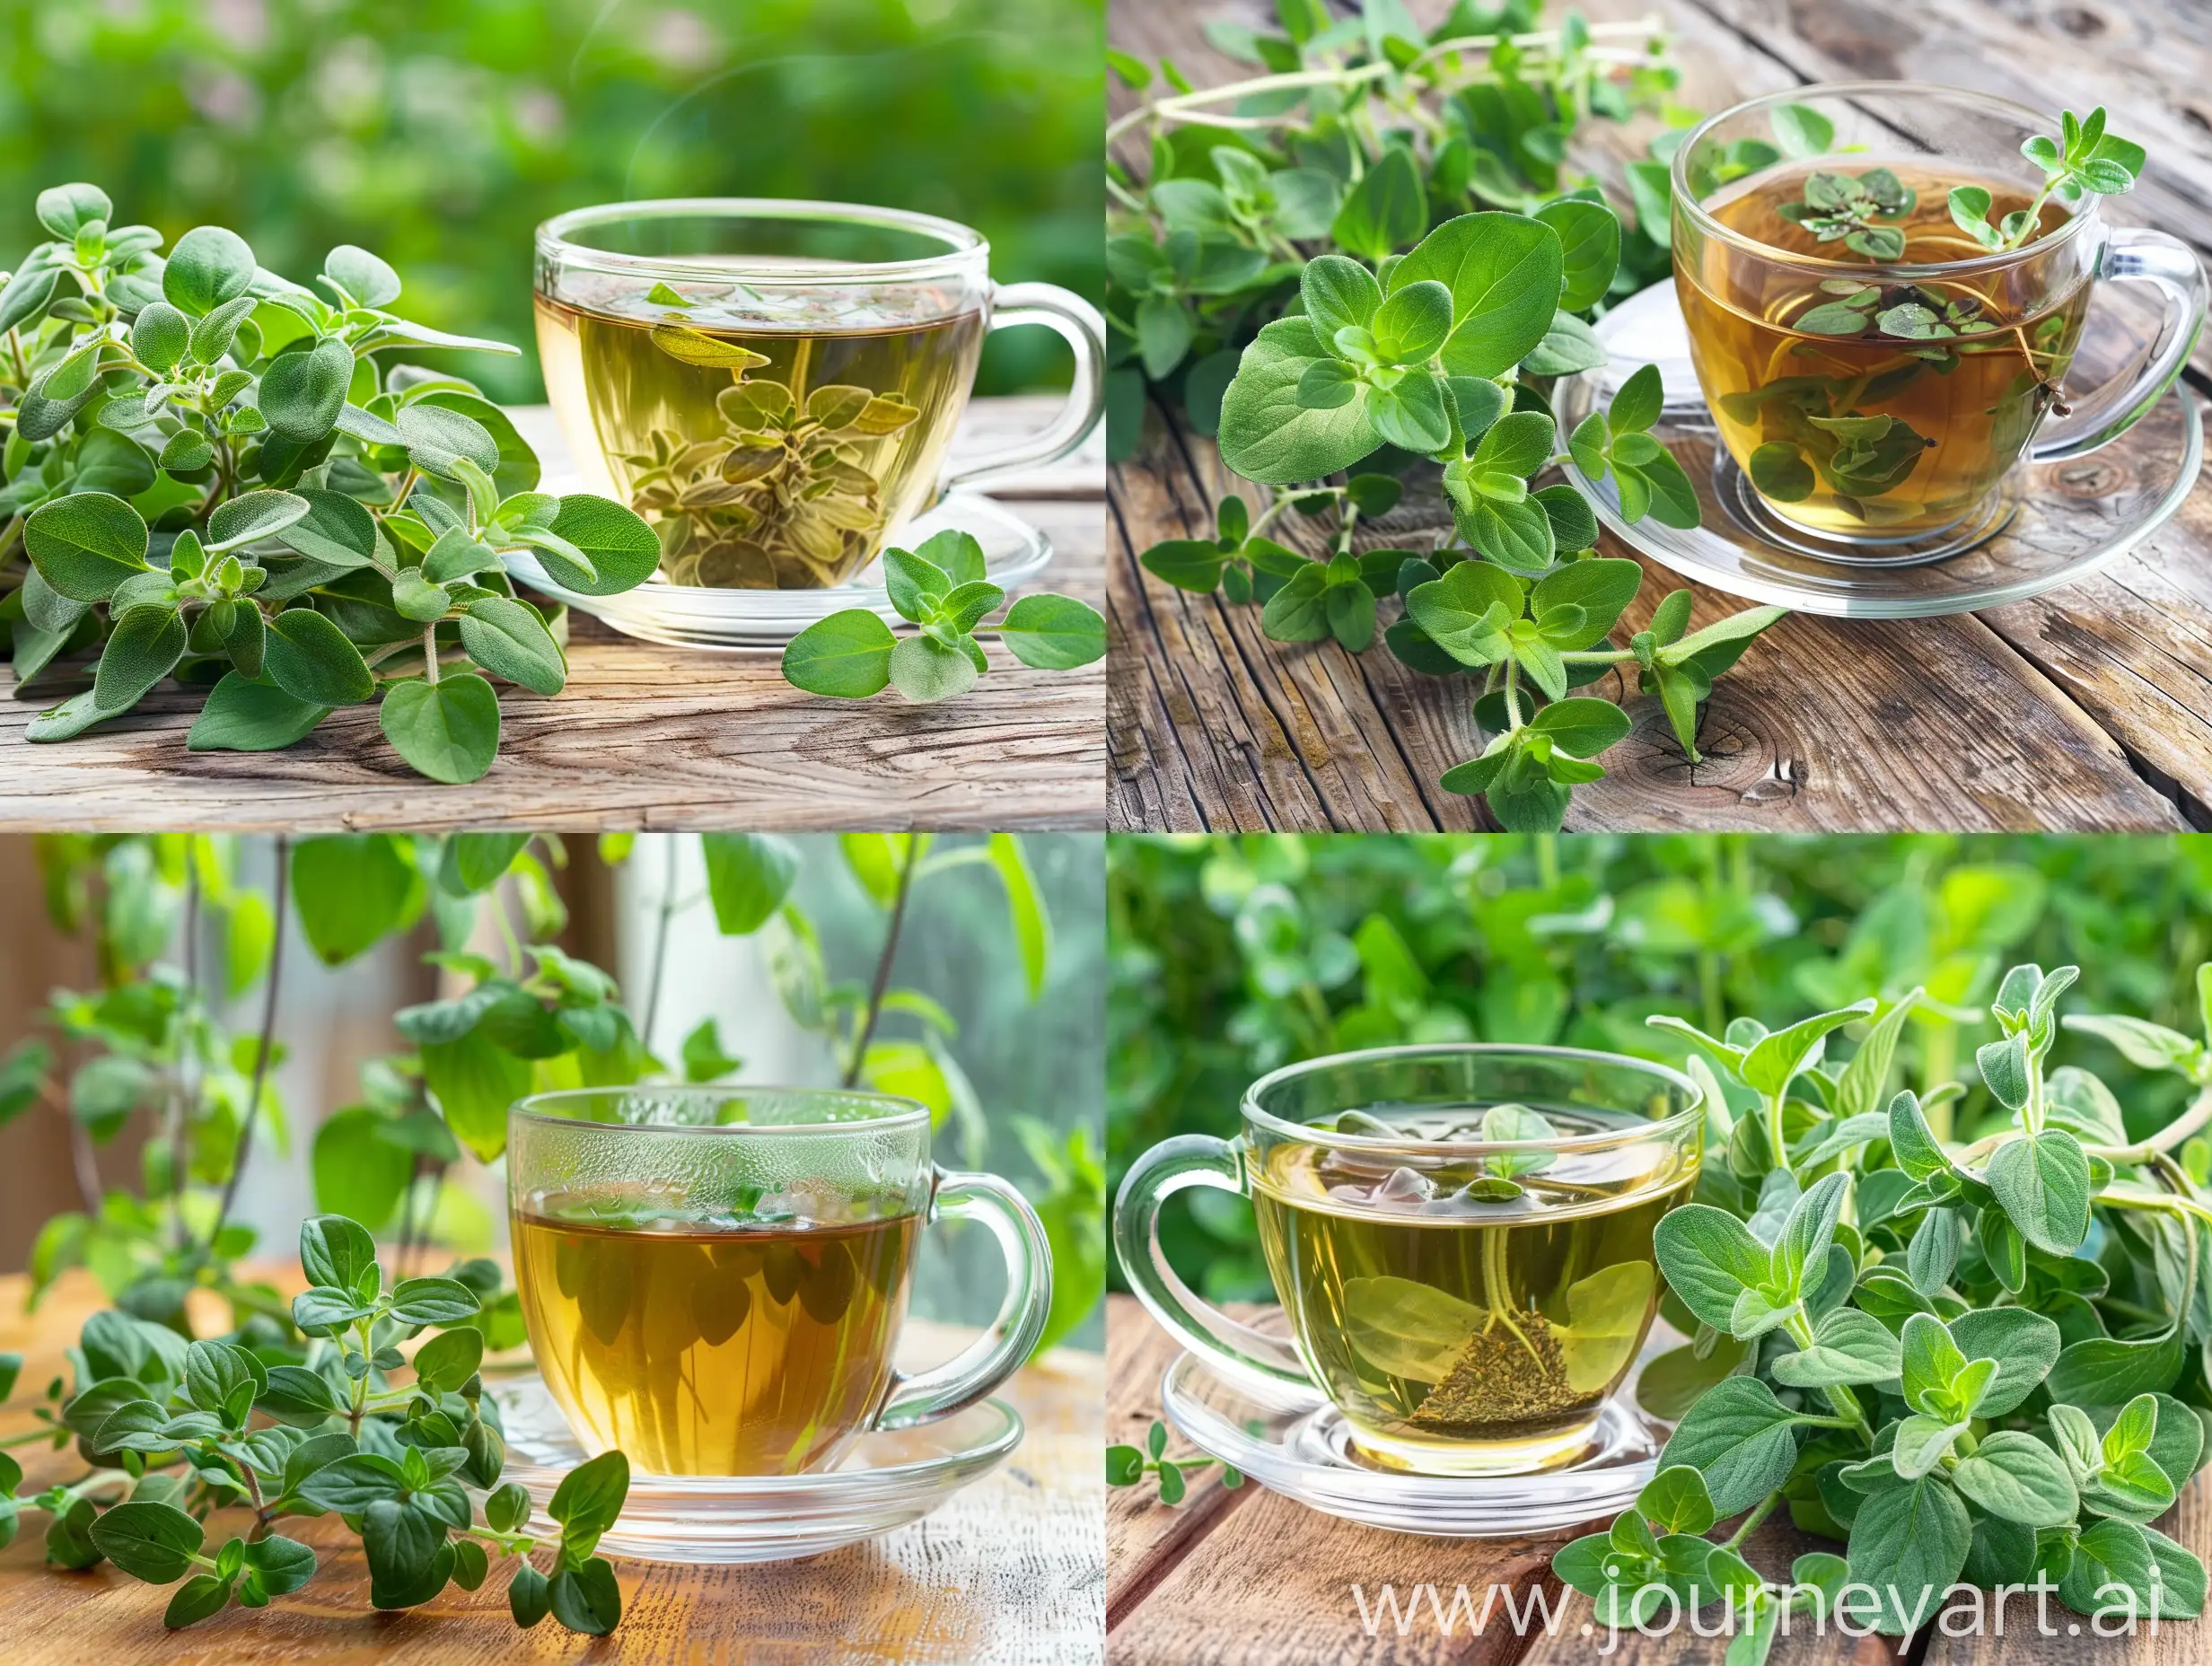 Fresh-Oregano-Plant-on-Rustic-Wooden-Table-with-Herbal-Tea